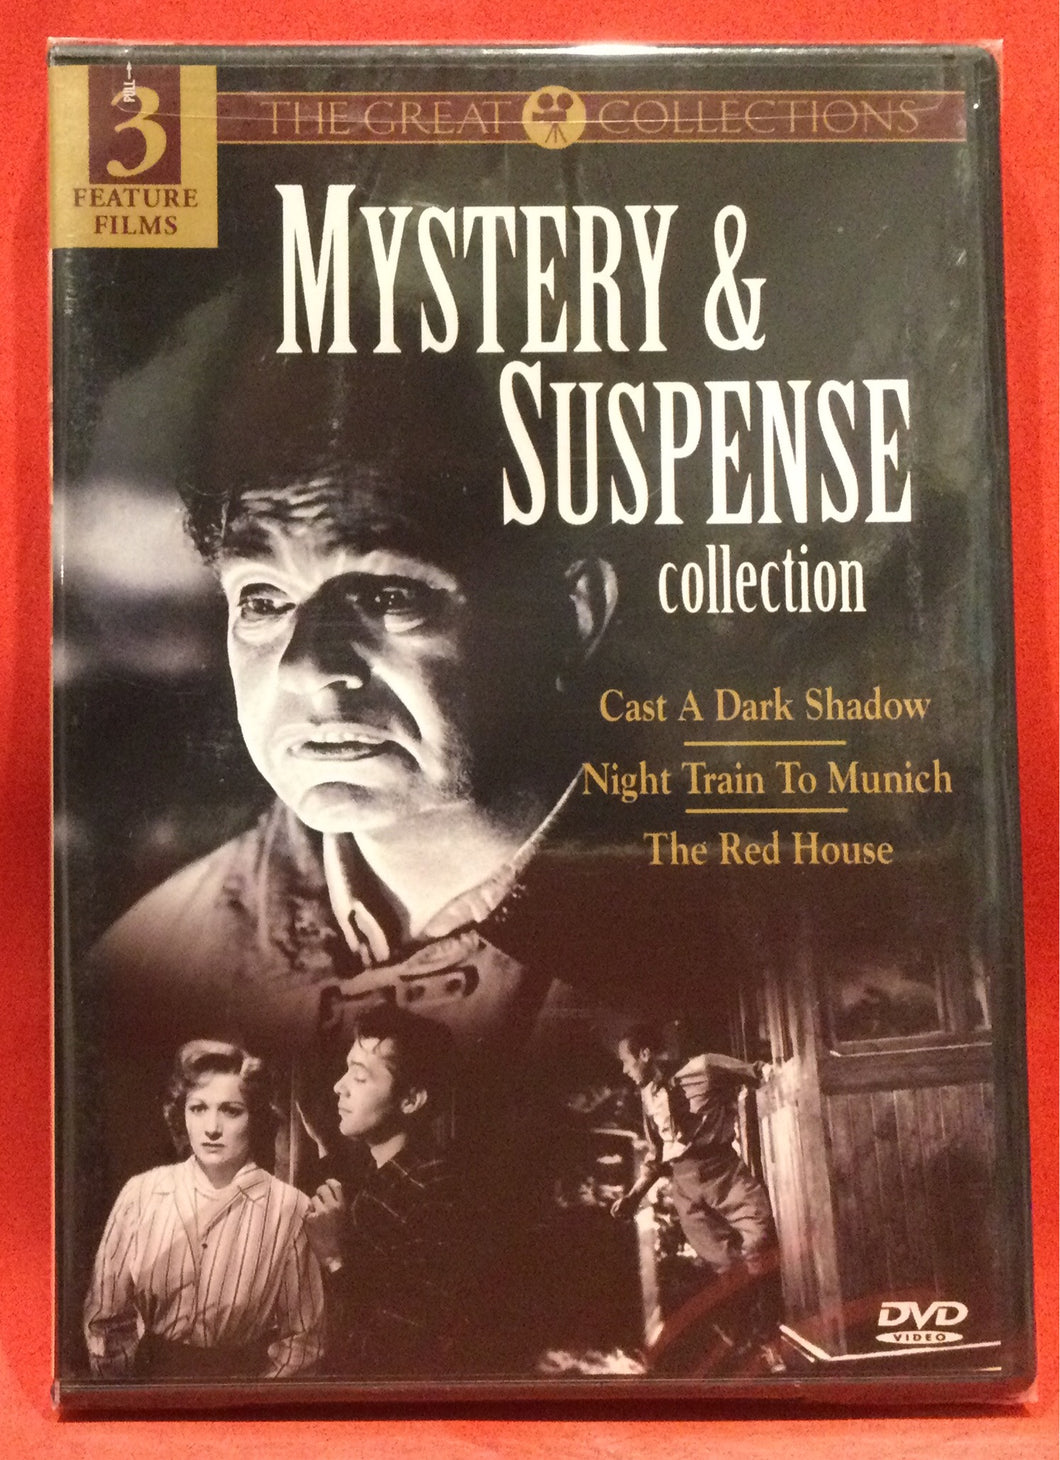 MYSTERY & SUSPENSE COLLECTION - 3 FILMS - DVD (SEALED)